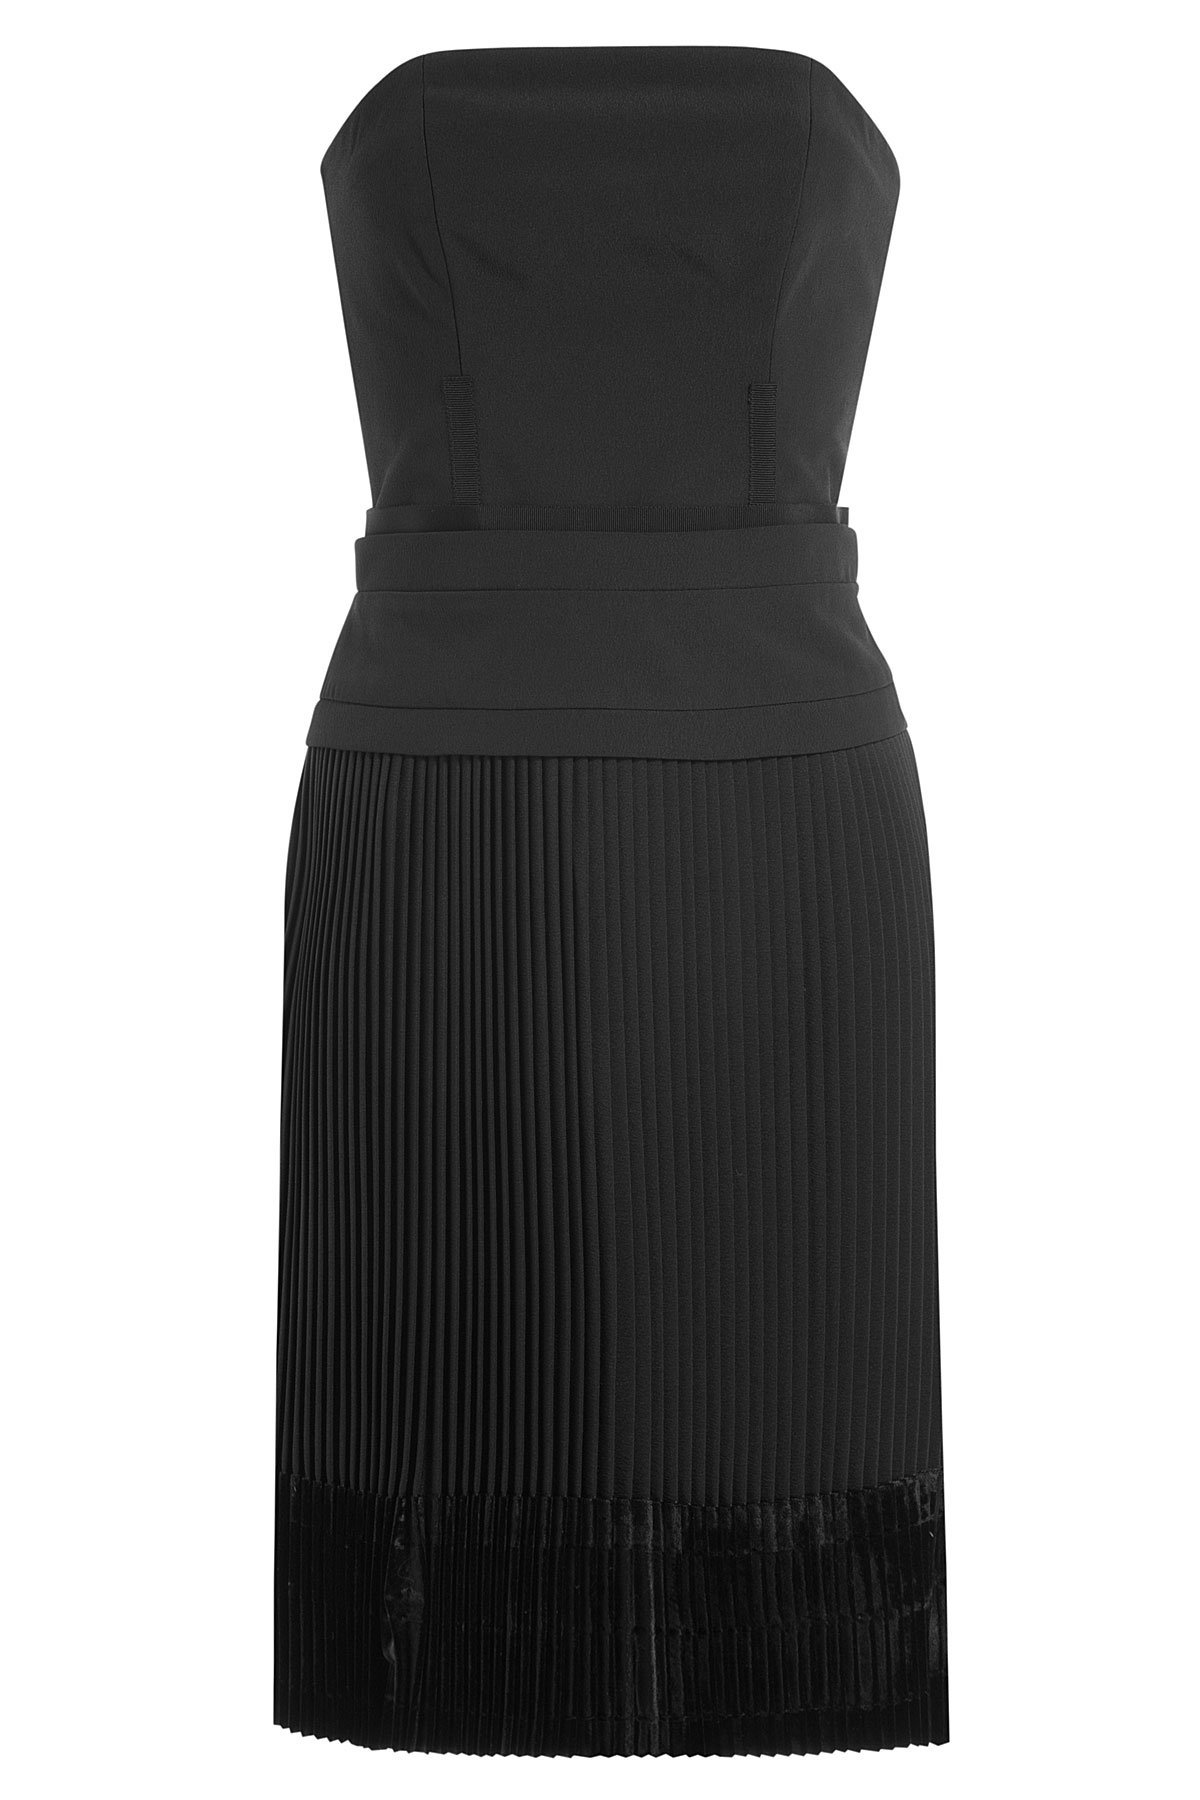 Carven - Strapless Dress with Pleated Skirt